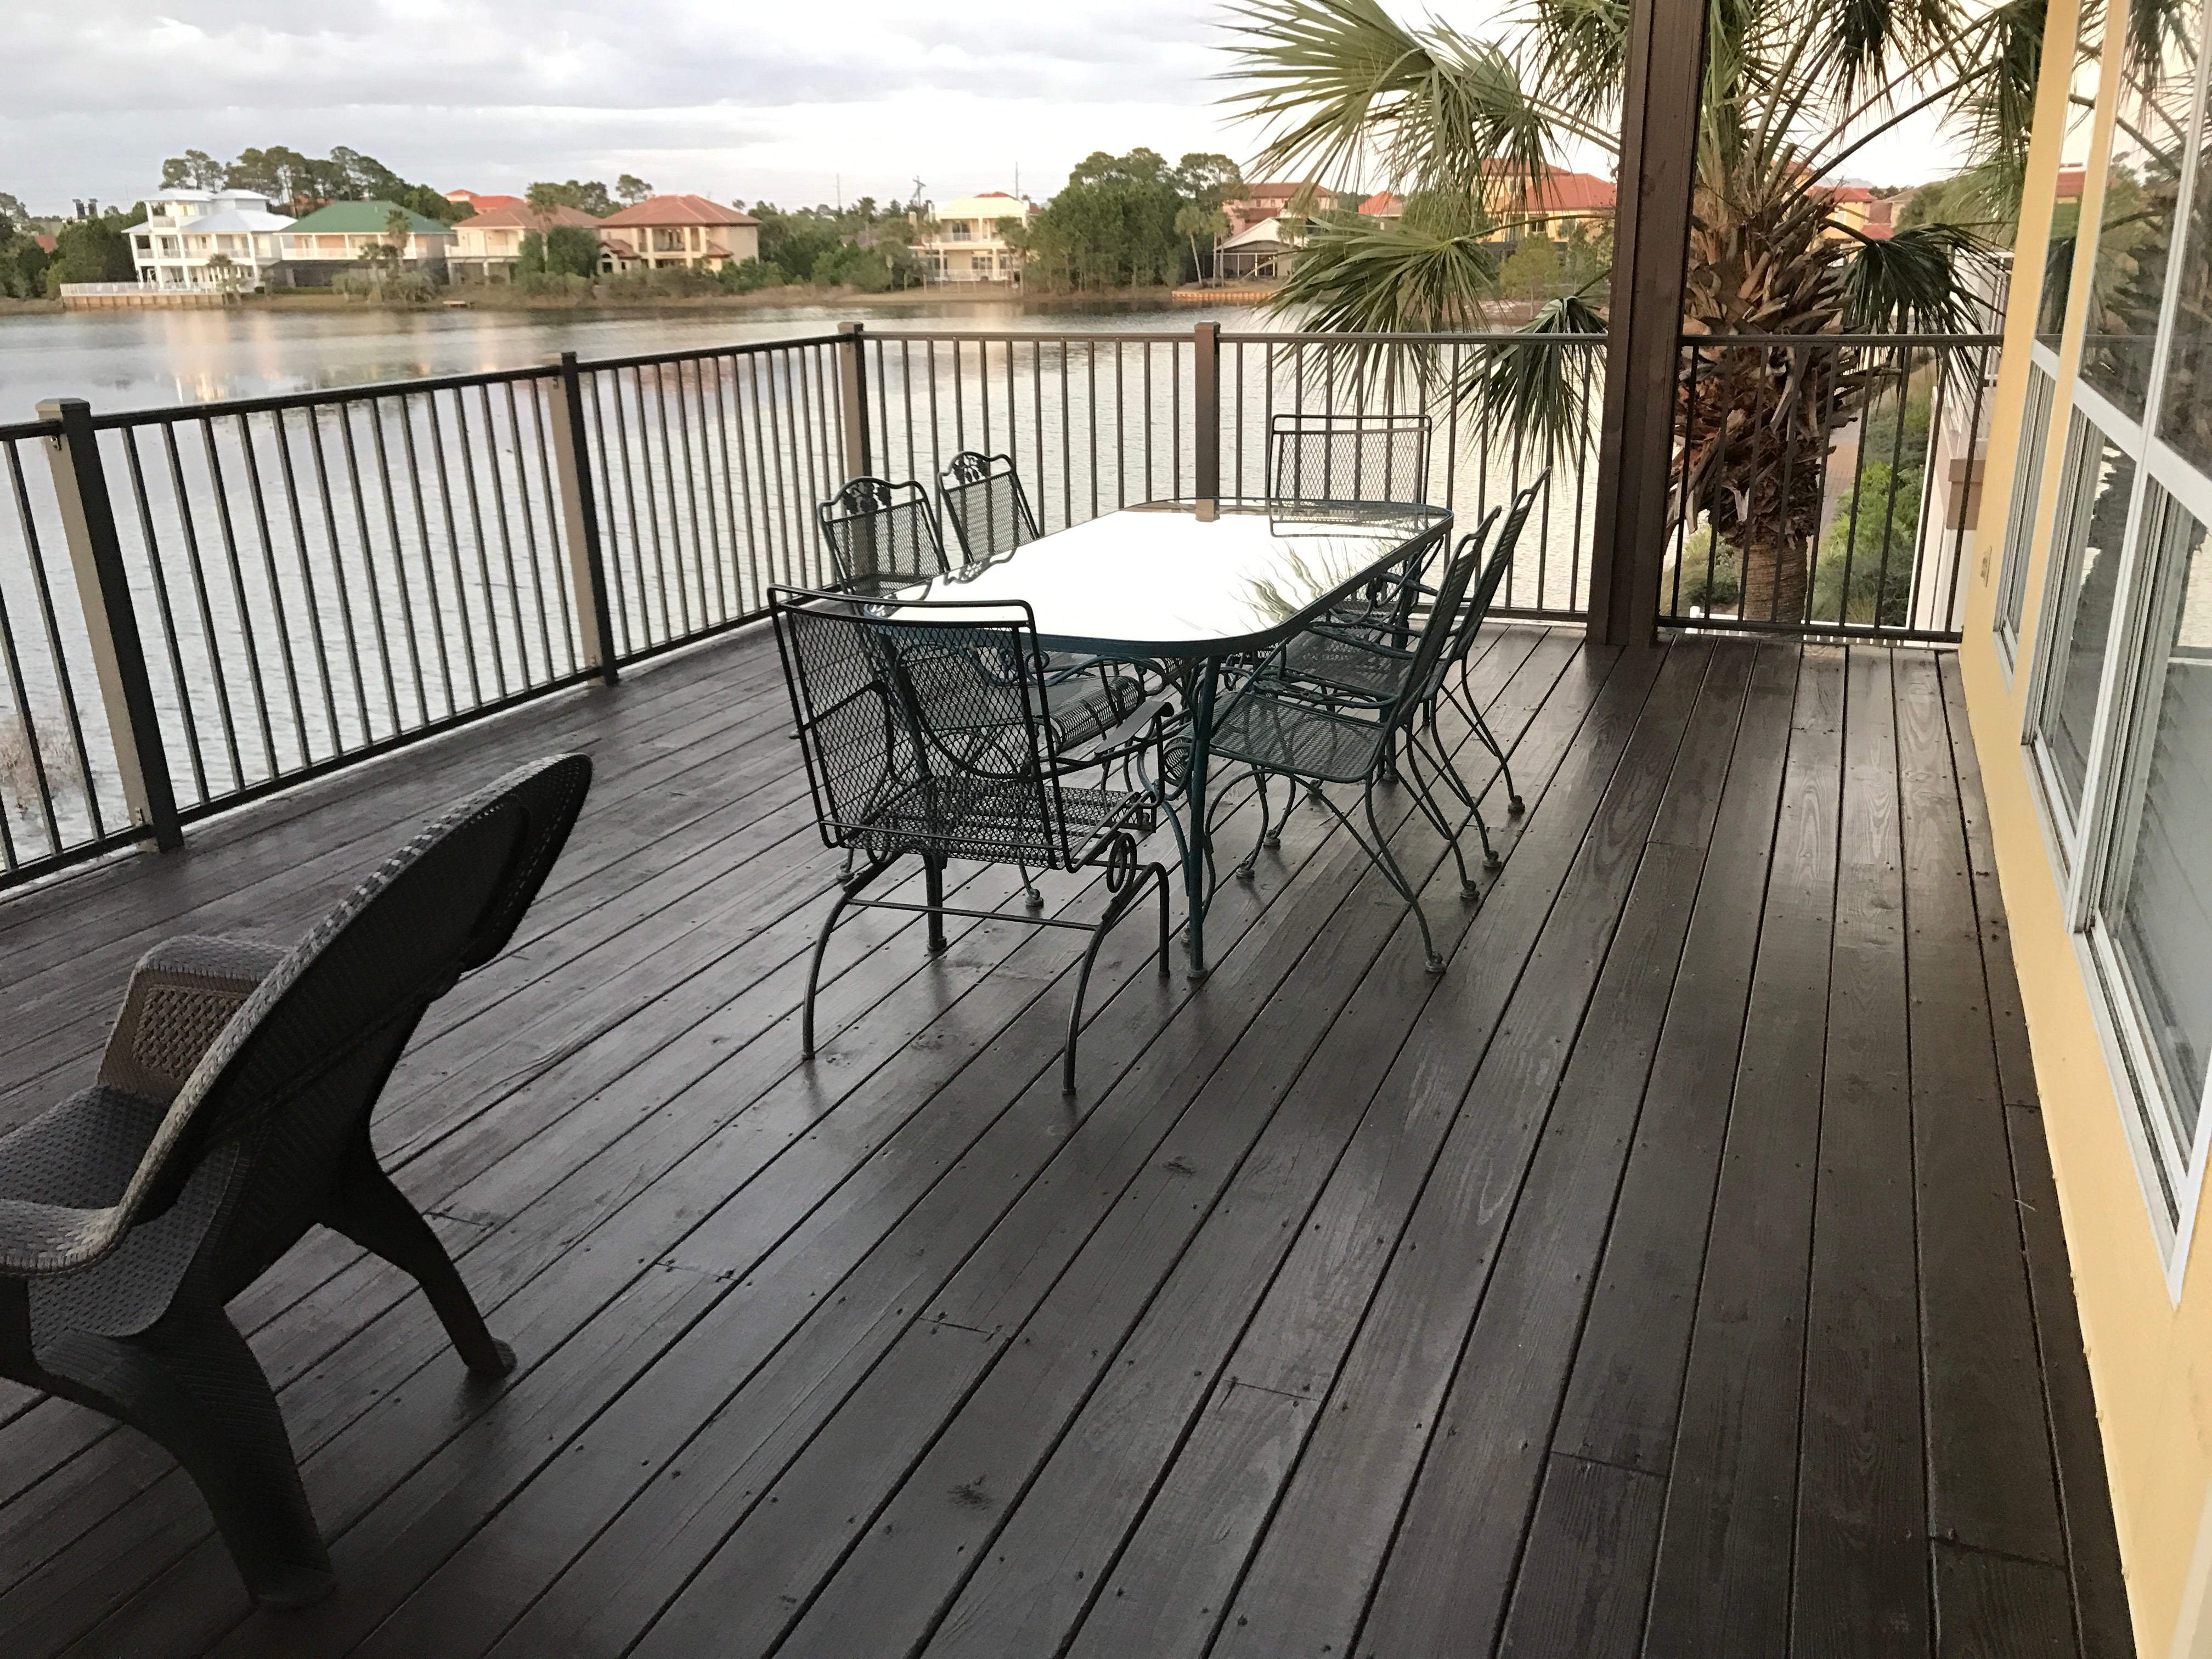 Enjoy a meal on the deck overlooking the lake